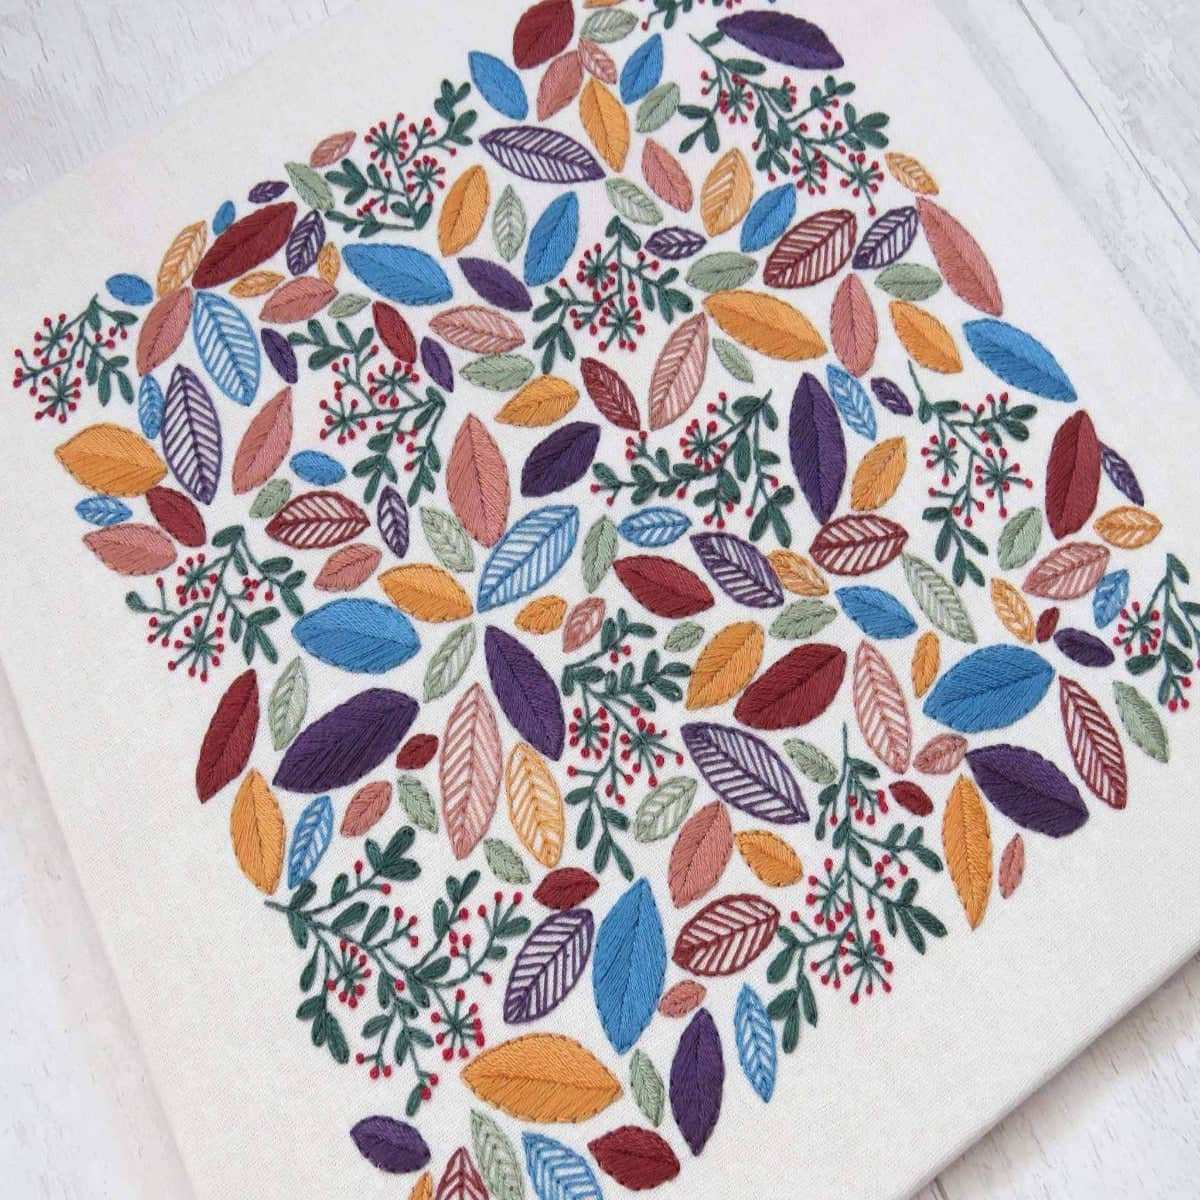 Changing Leaves Hand Embroidery Pattern , PDF Download , StitchDoodles , Embroidery, embroidery hoop, embroidery hoop kit, Embroidery Kit, embroidery kit for adults, embroidery kit fro beginners, embroidery kits for beginners, embroidery pattern, hand embroidery, hand embroidery fabric, hand embroidery seat frame, modern embroidery kits, nurge embroidery hoop, PDF pattern, Printed Pattern , StitchDoodles , shop.stitchdoodles.com